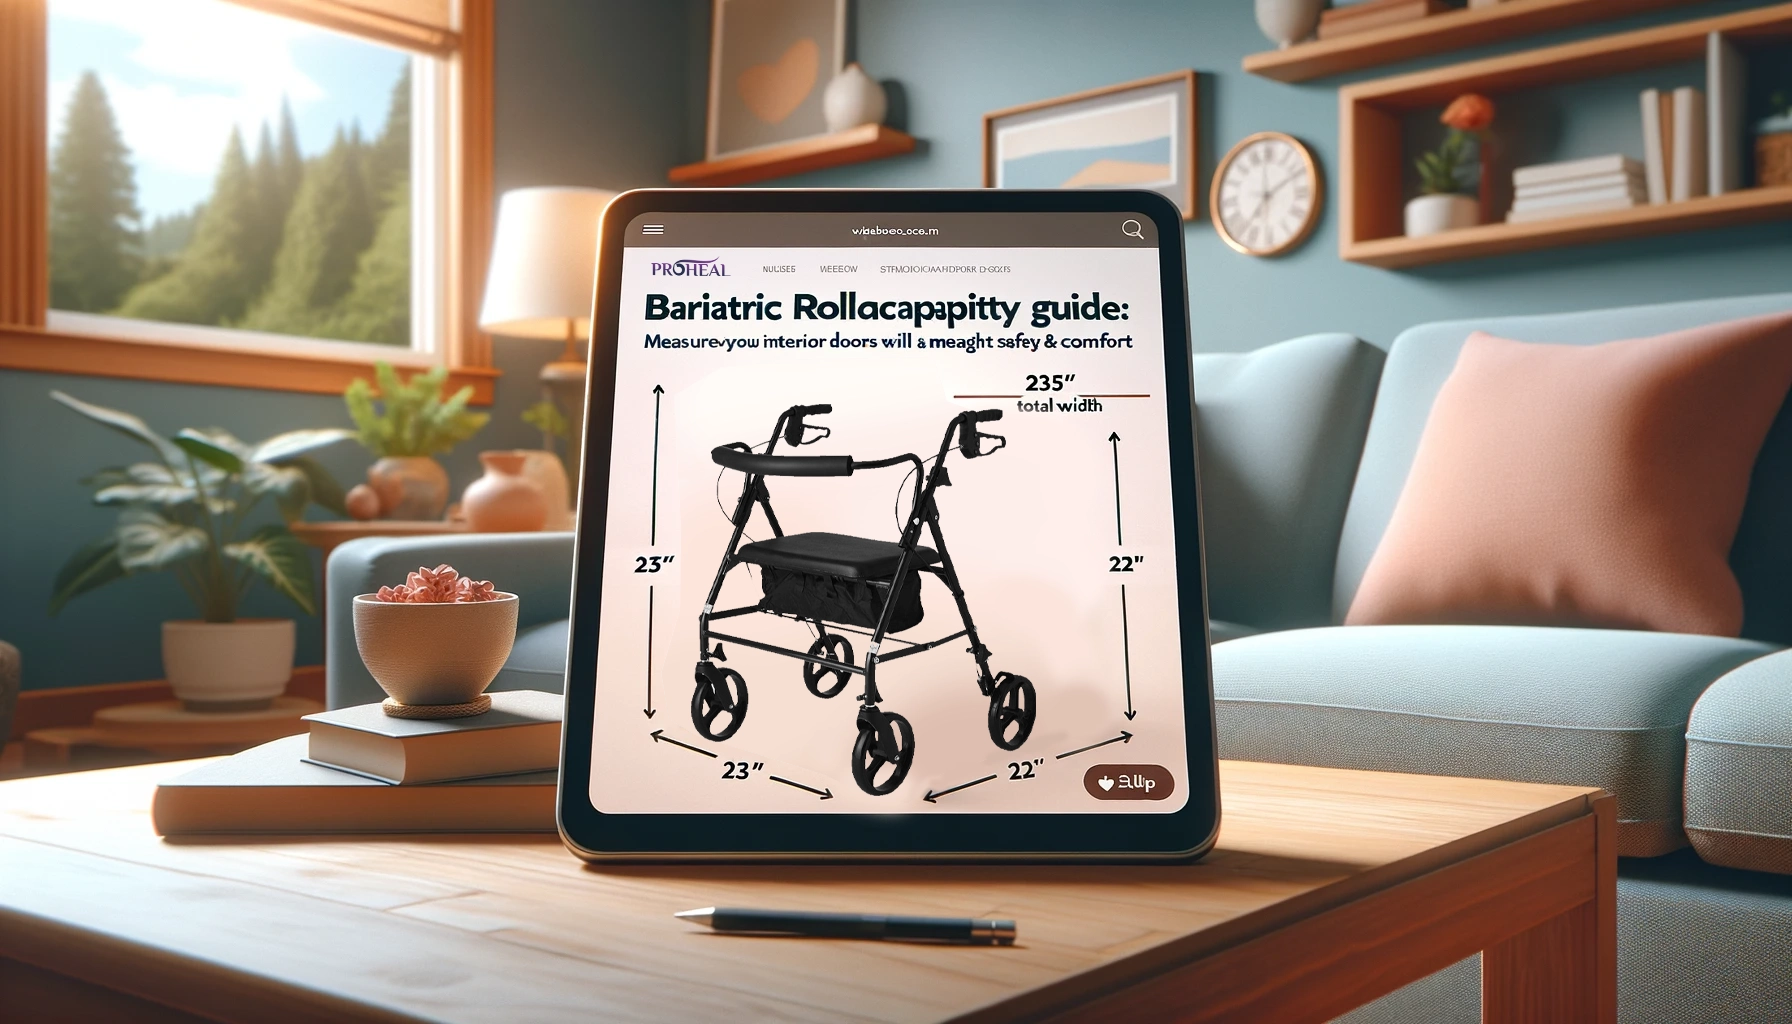 What Are the Dimensions and Size of the Bariatric Rollator?